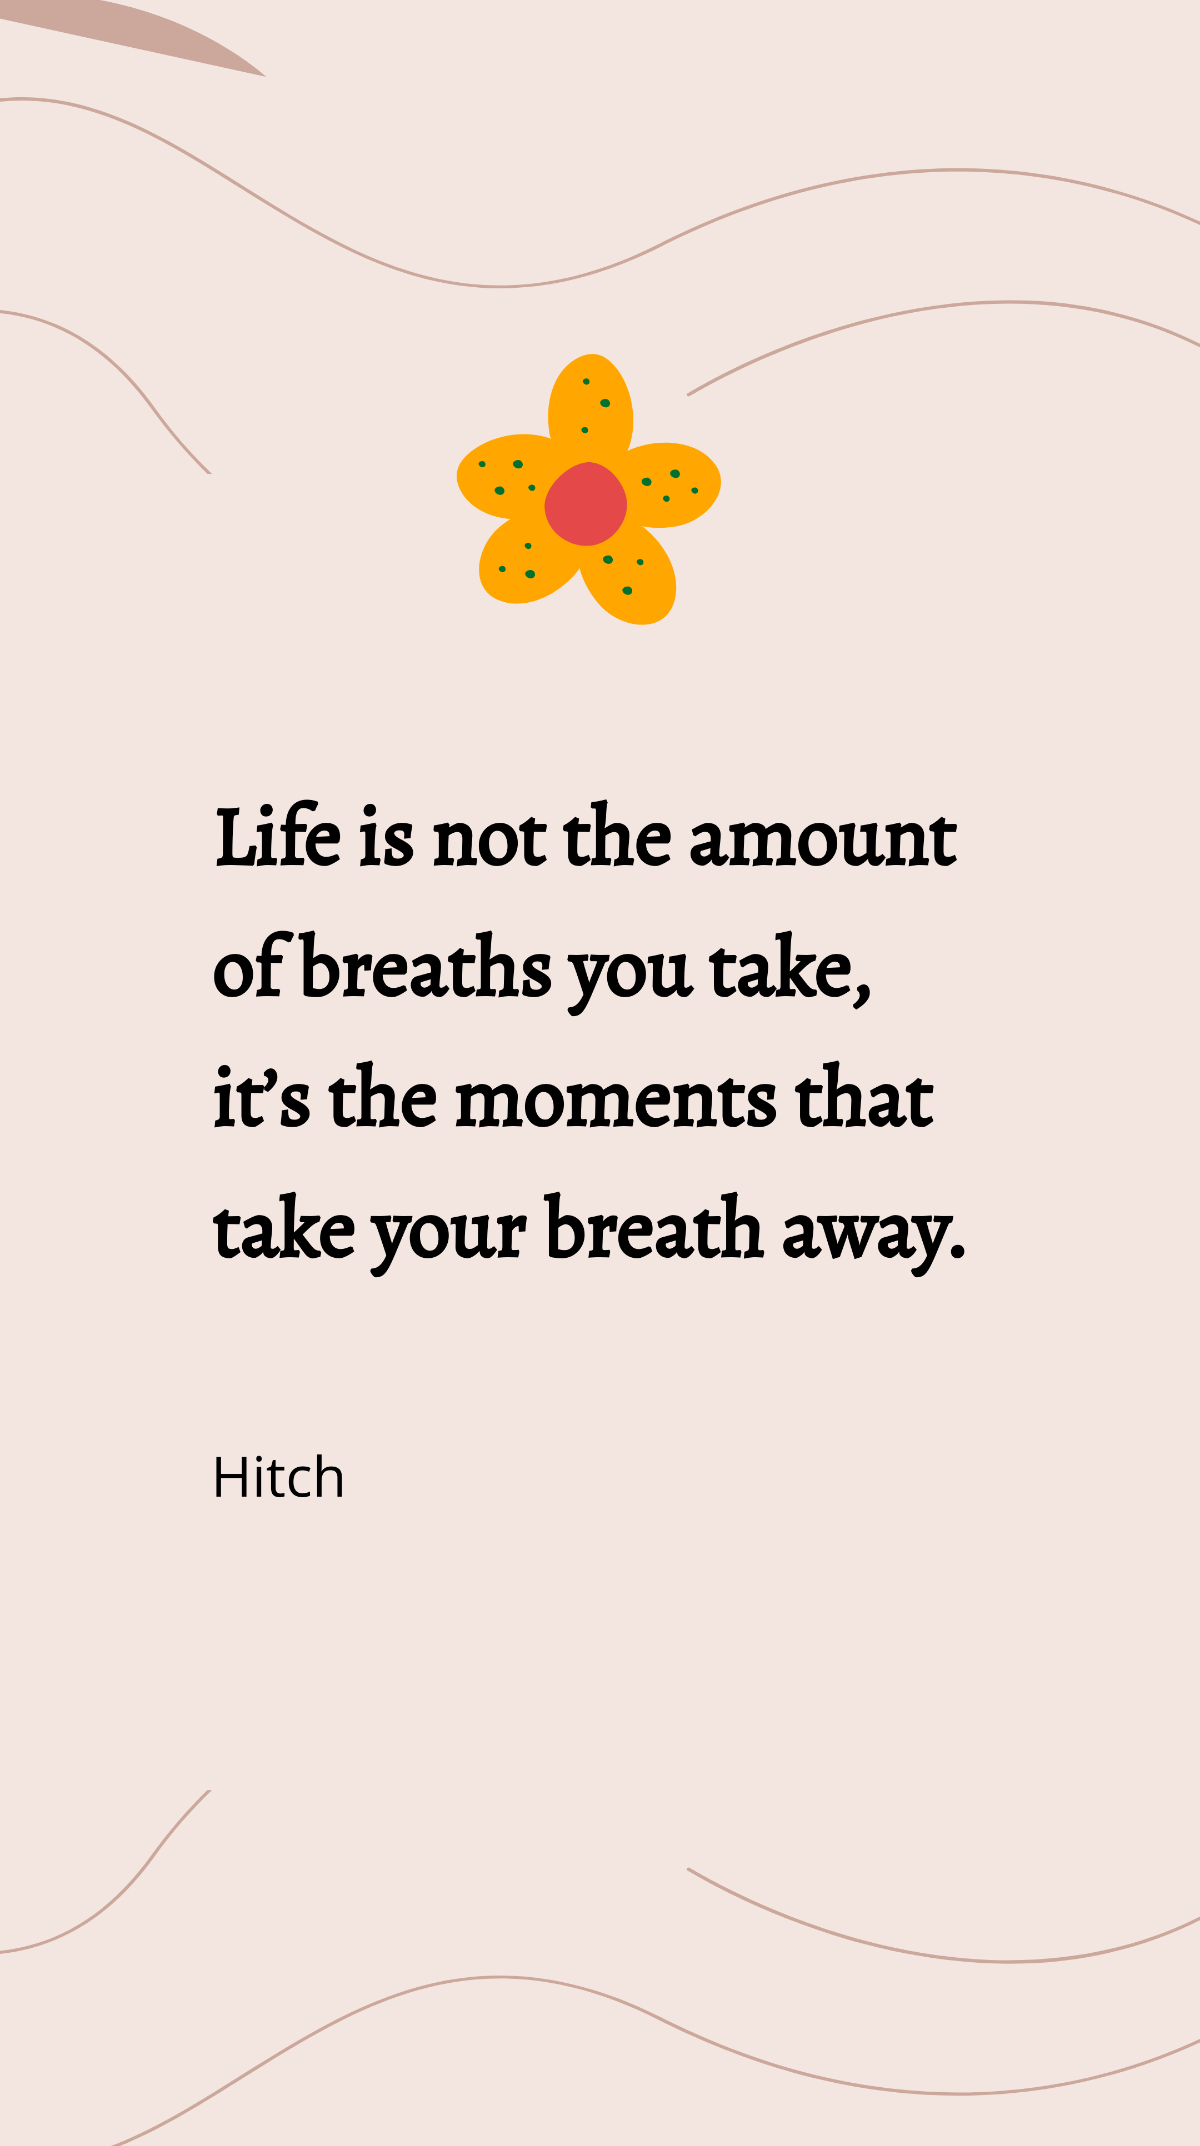 Hitch - “Life is not the amount of breaths you take, it’s the moments that take your breath away.” Template